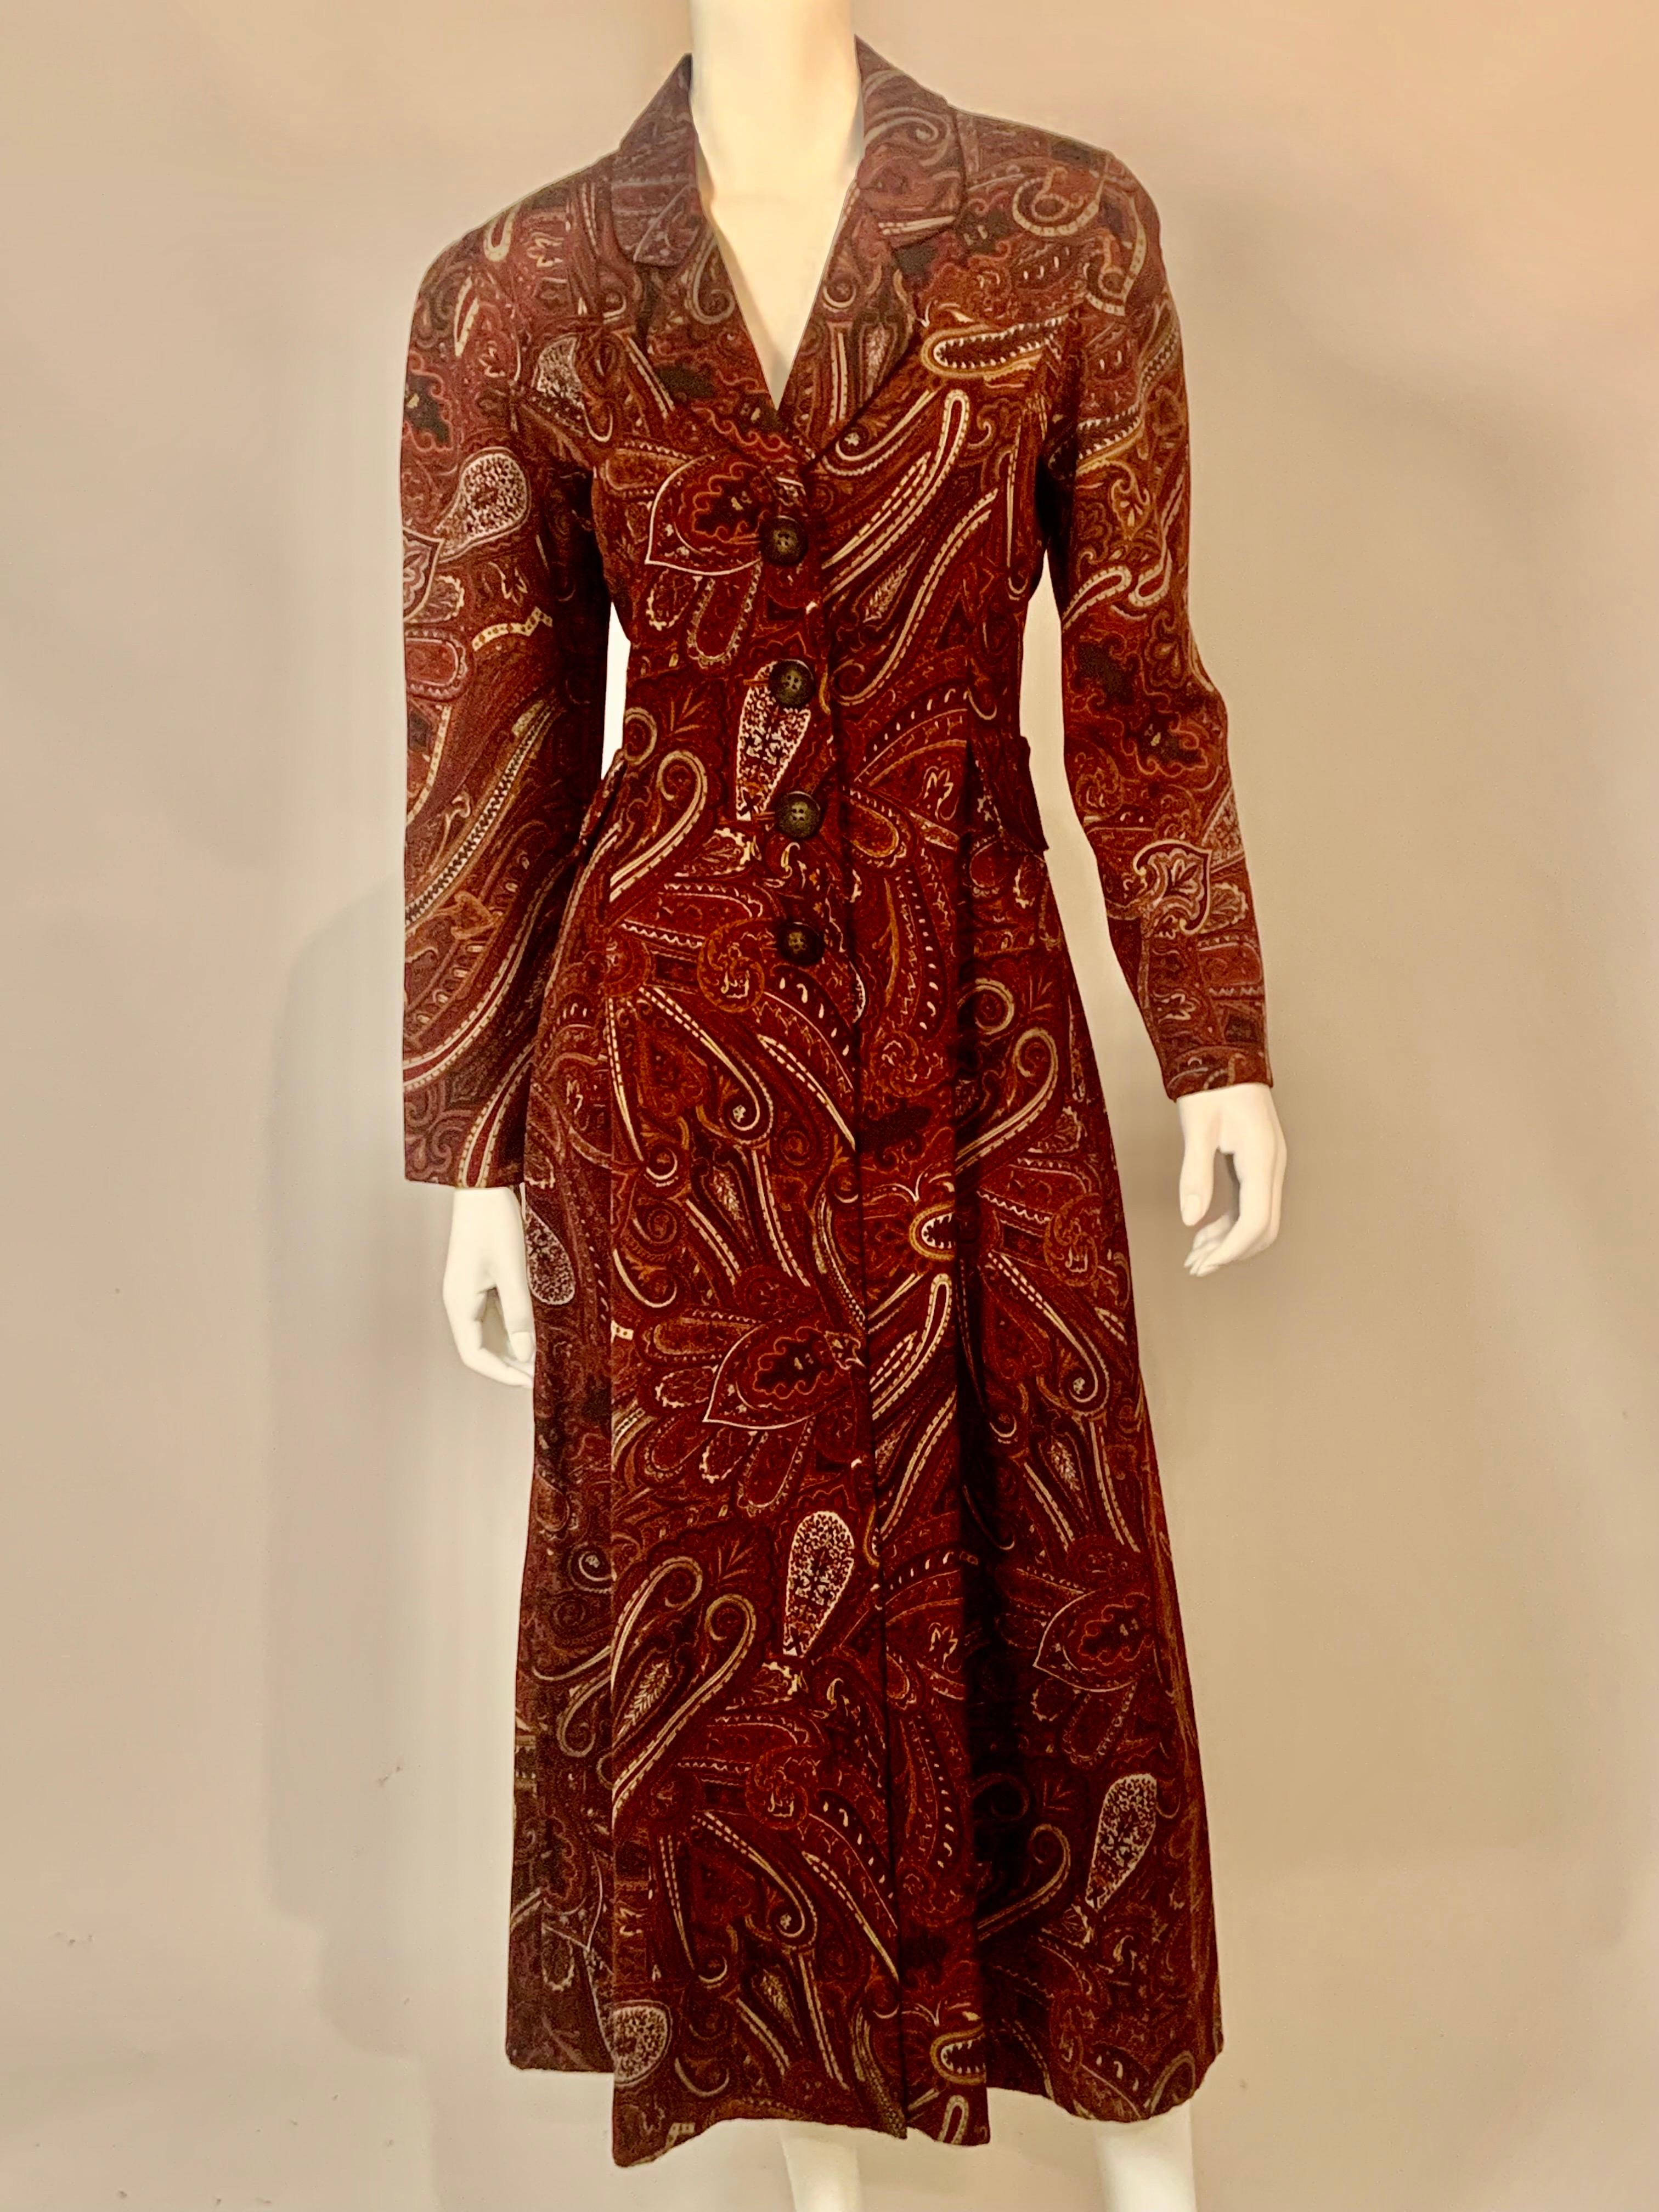 Bill Blass Paisley Patterned Coat in a Larger Size For Sale 7